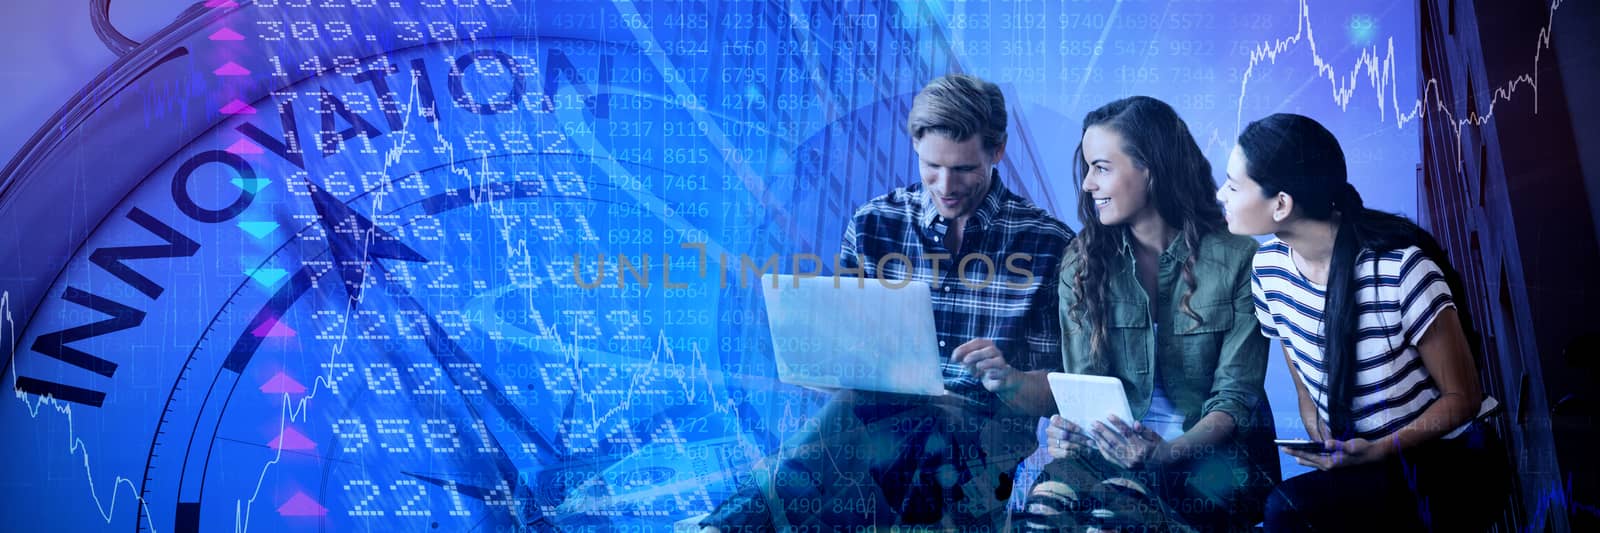 Composite image of business people discussing over laptop while sitting on seat by Wavebreakmedia